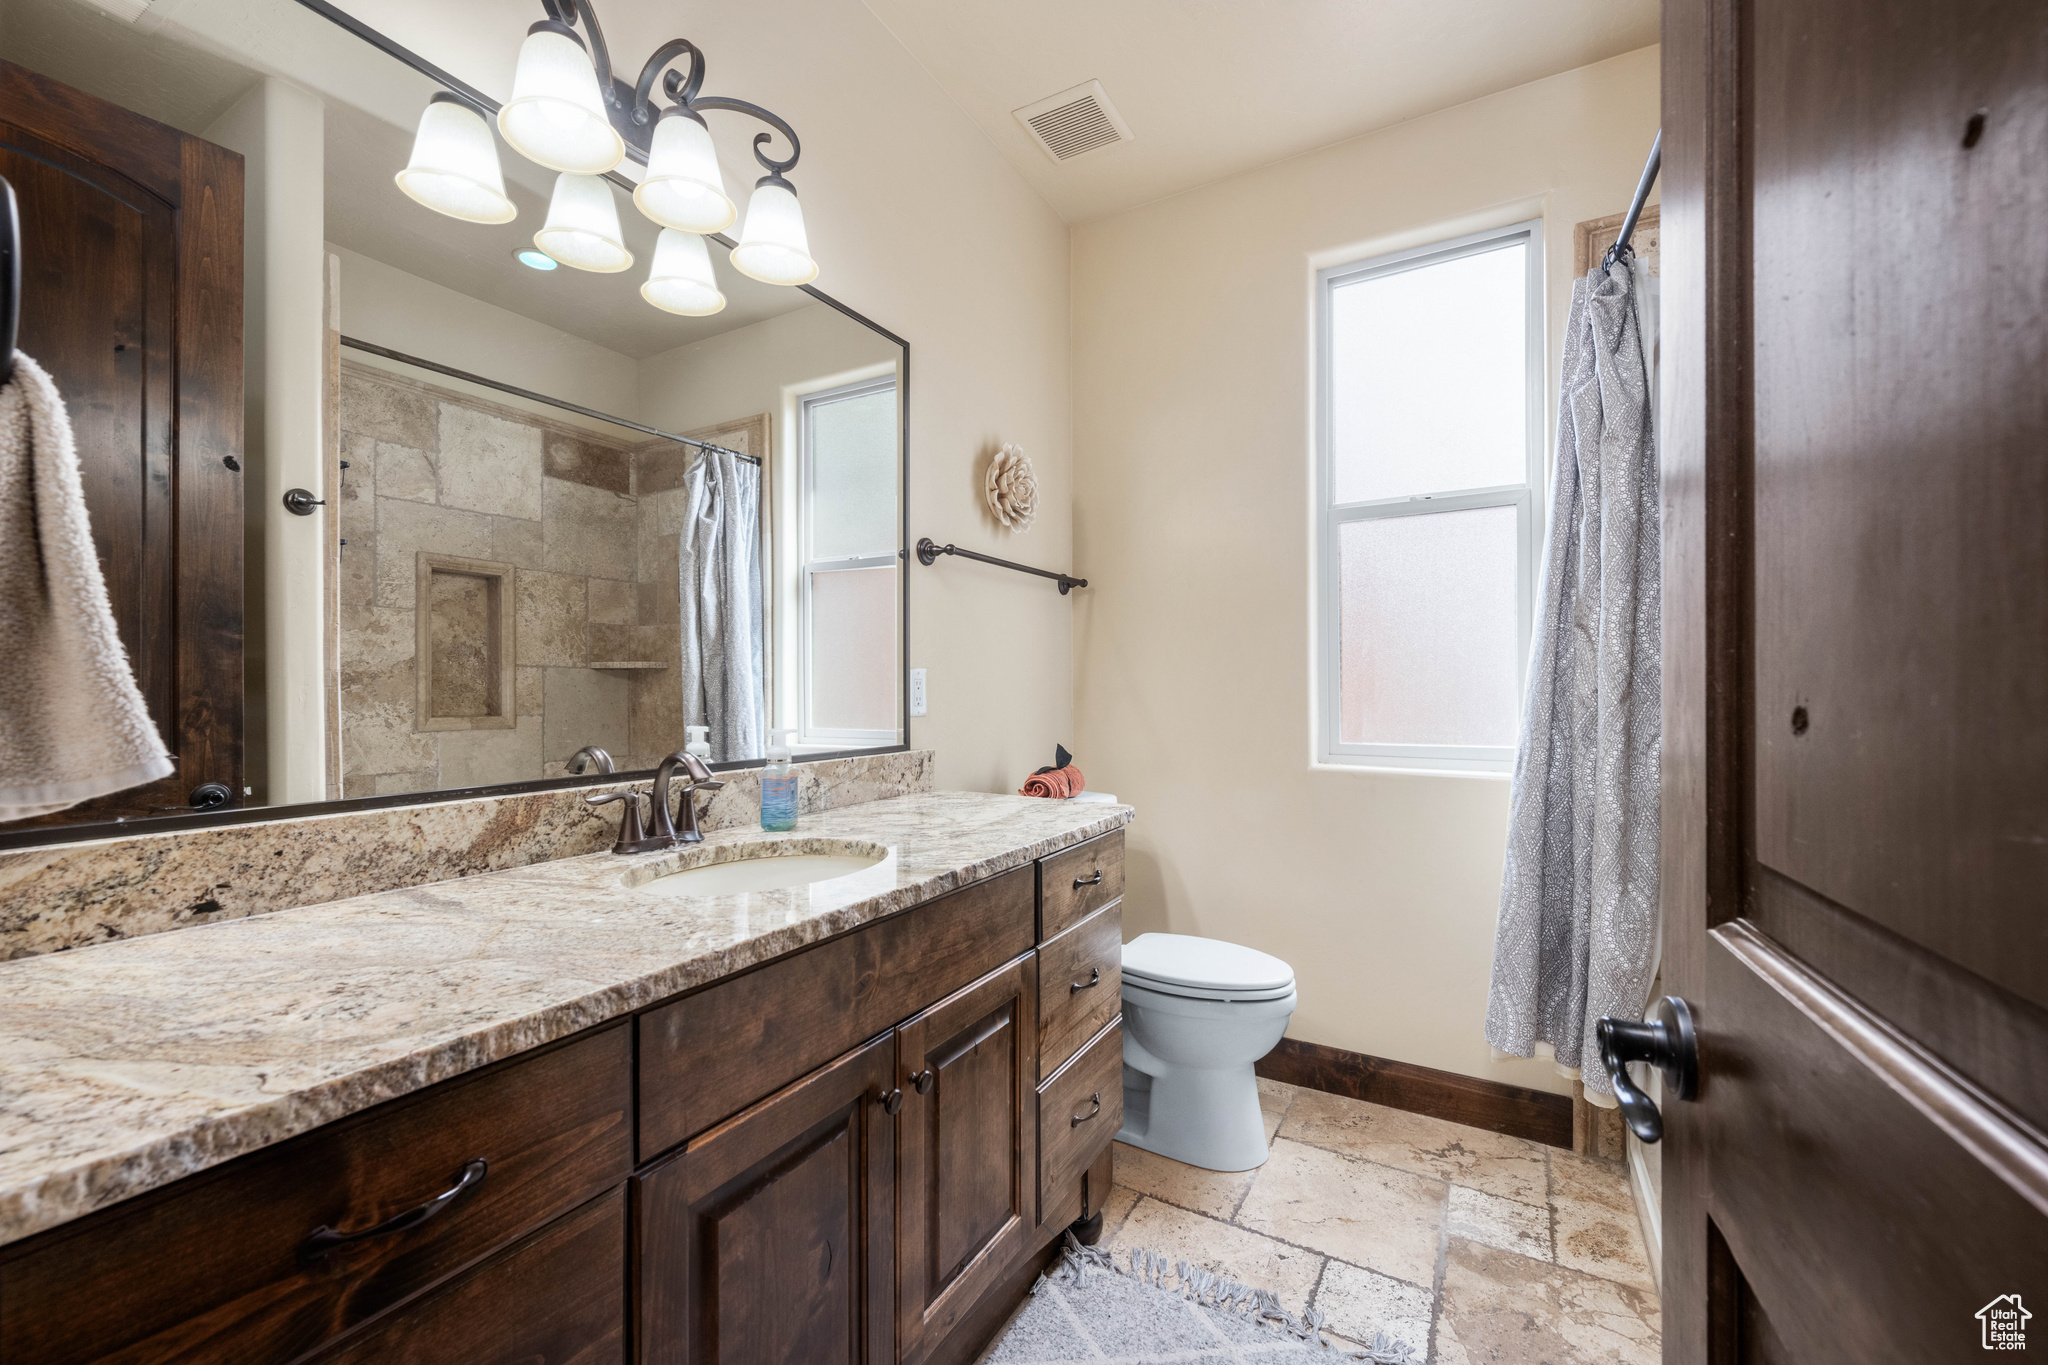 Bathroom with an inviting chandelier, toilet, tile floors, and vanity